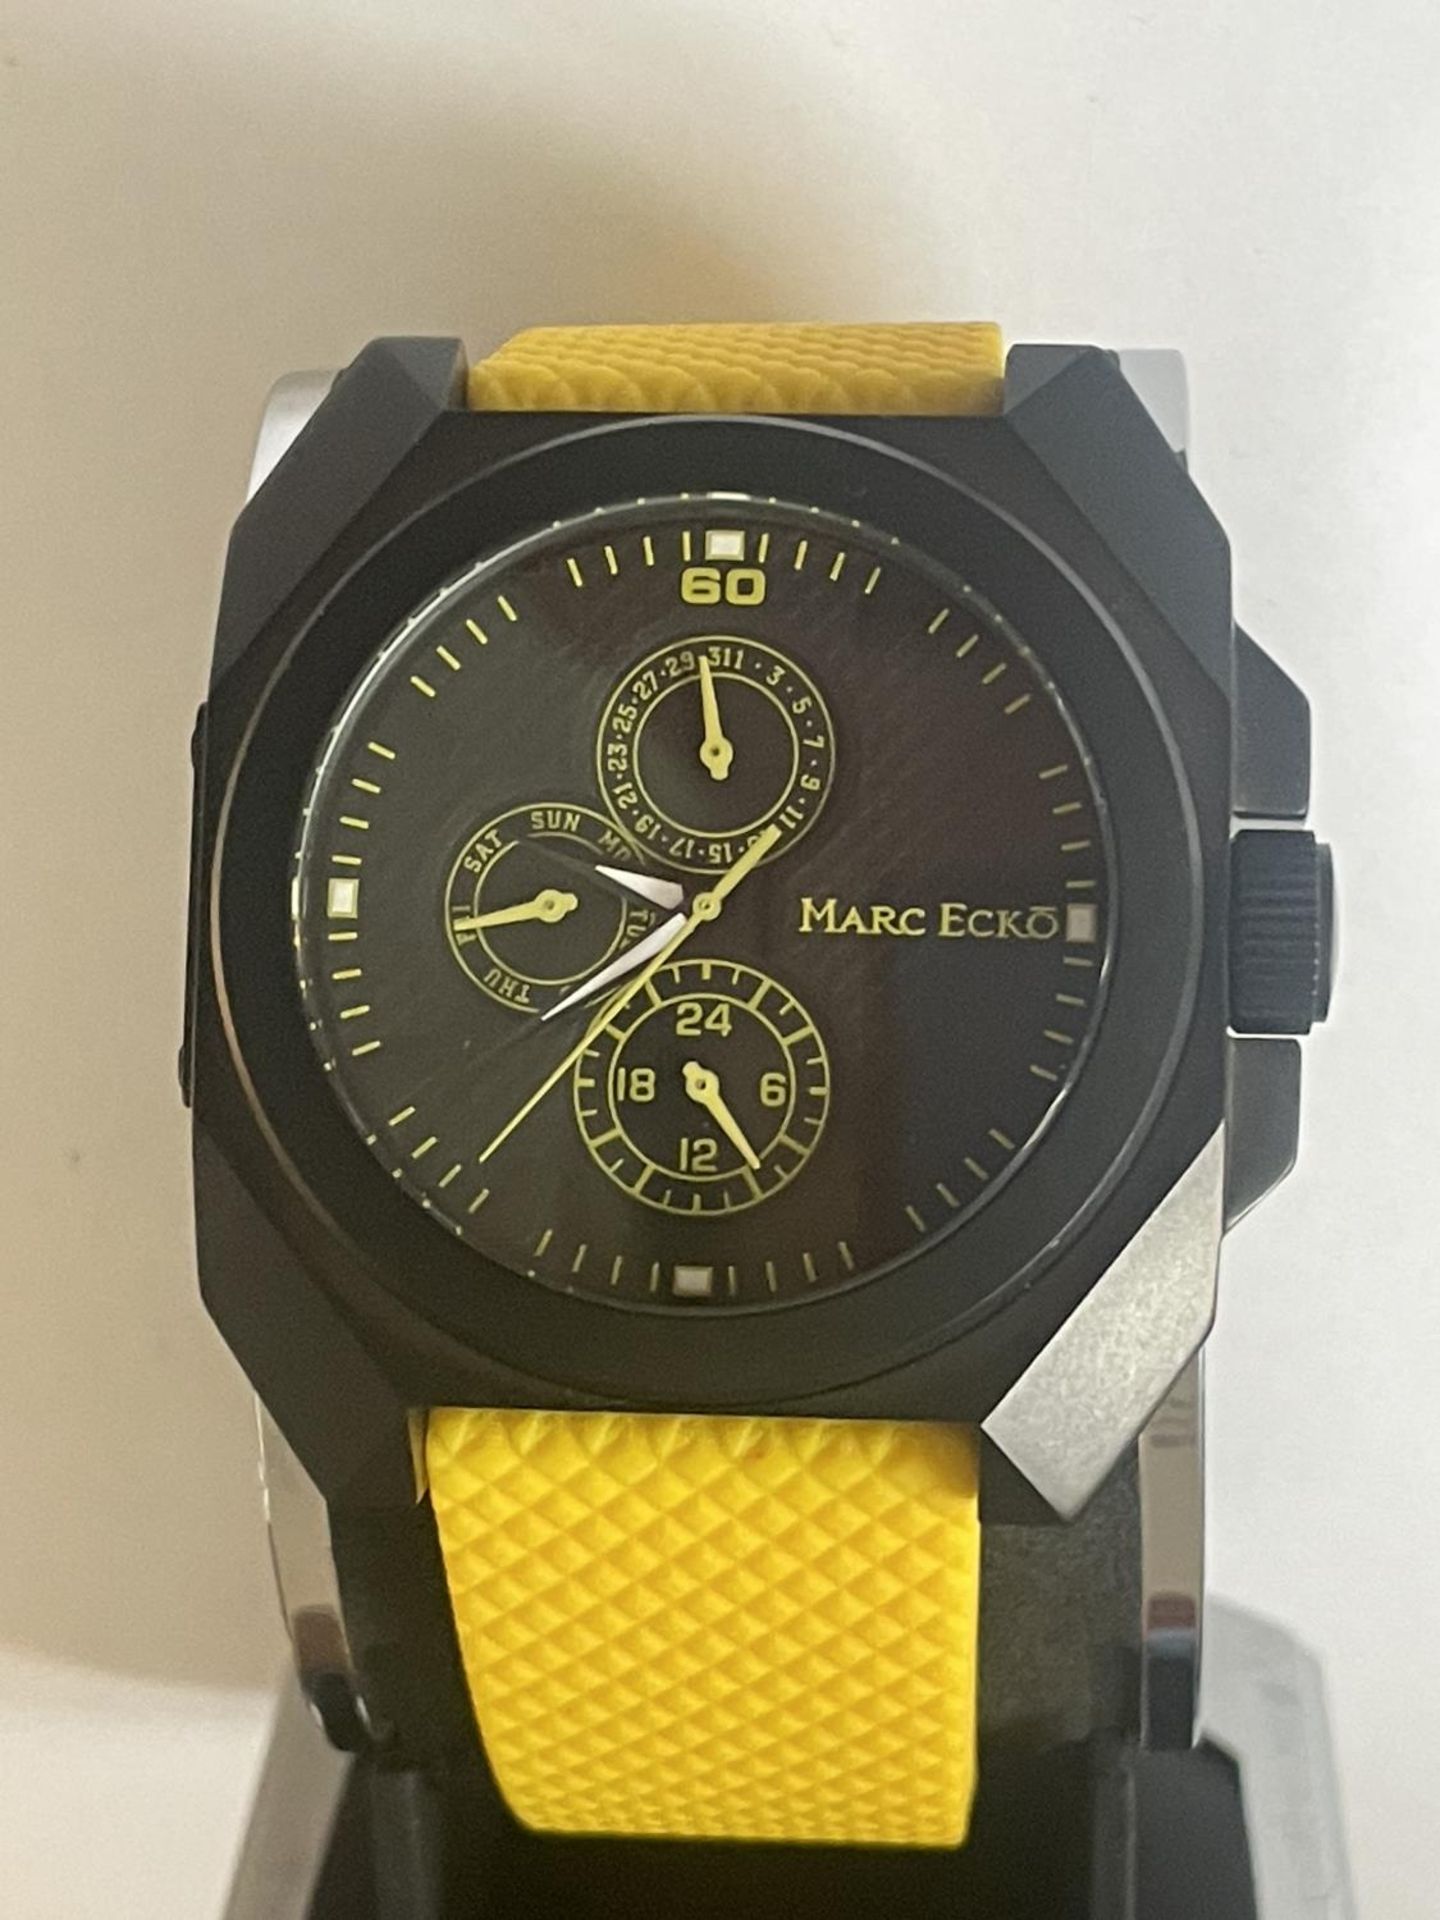 A MARC ECKO PASTIME WATCH (QUARTZ) MODEL E1359861 DAY DATE AS NEW WITH BOX SEEN IN WORKING ORDER BUT - Image 2 of 3